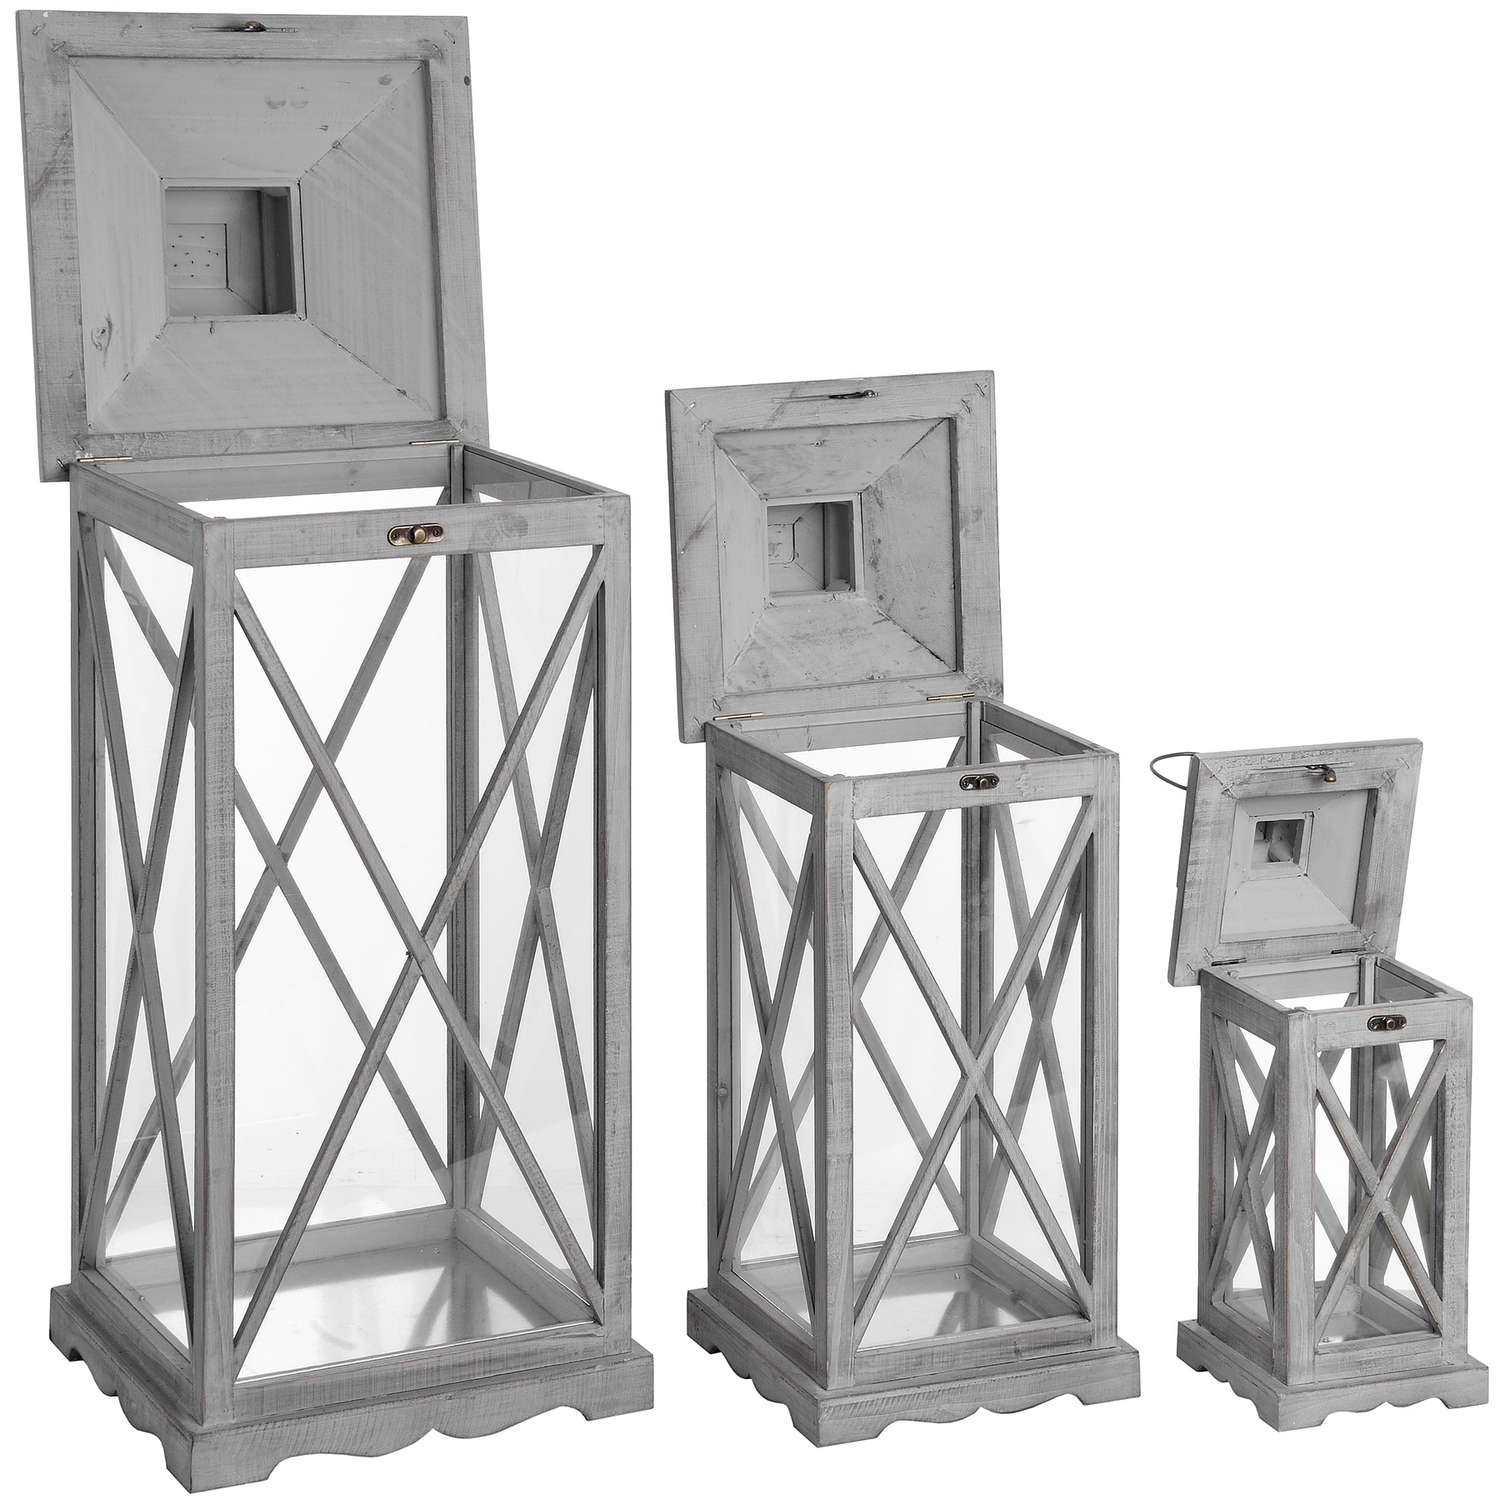 Set Of Three Wooden Lanterns With Traditional Cross Section - Image 3